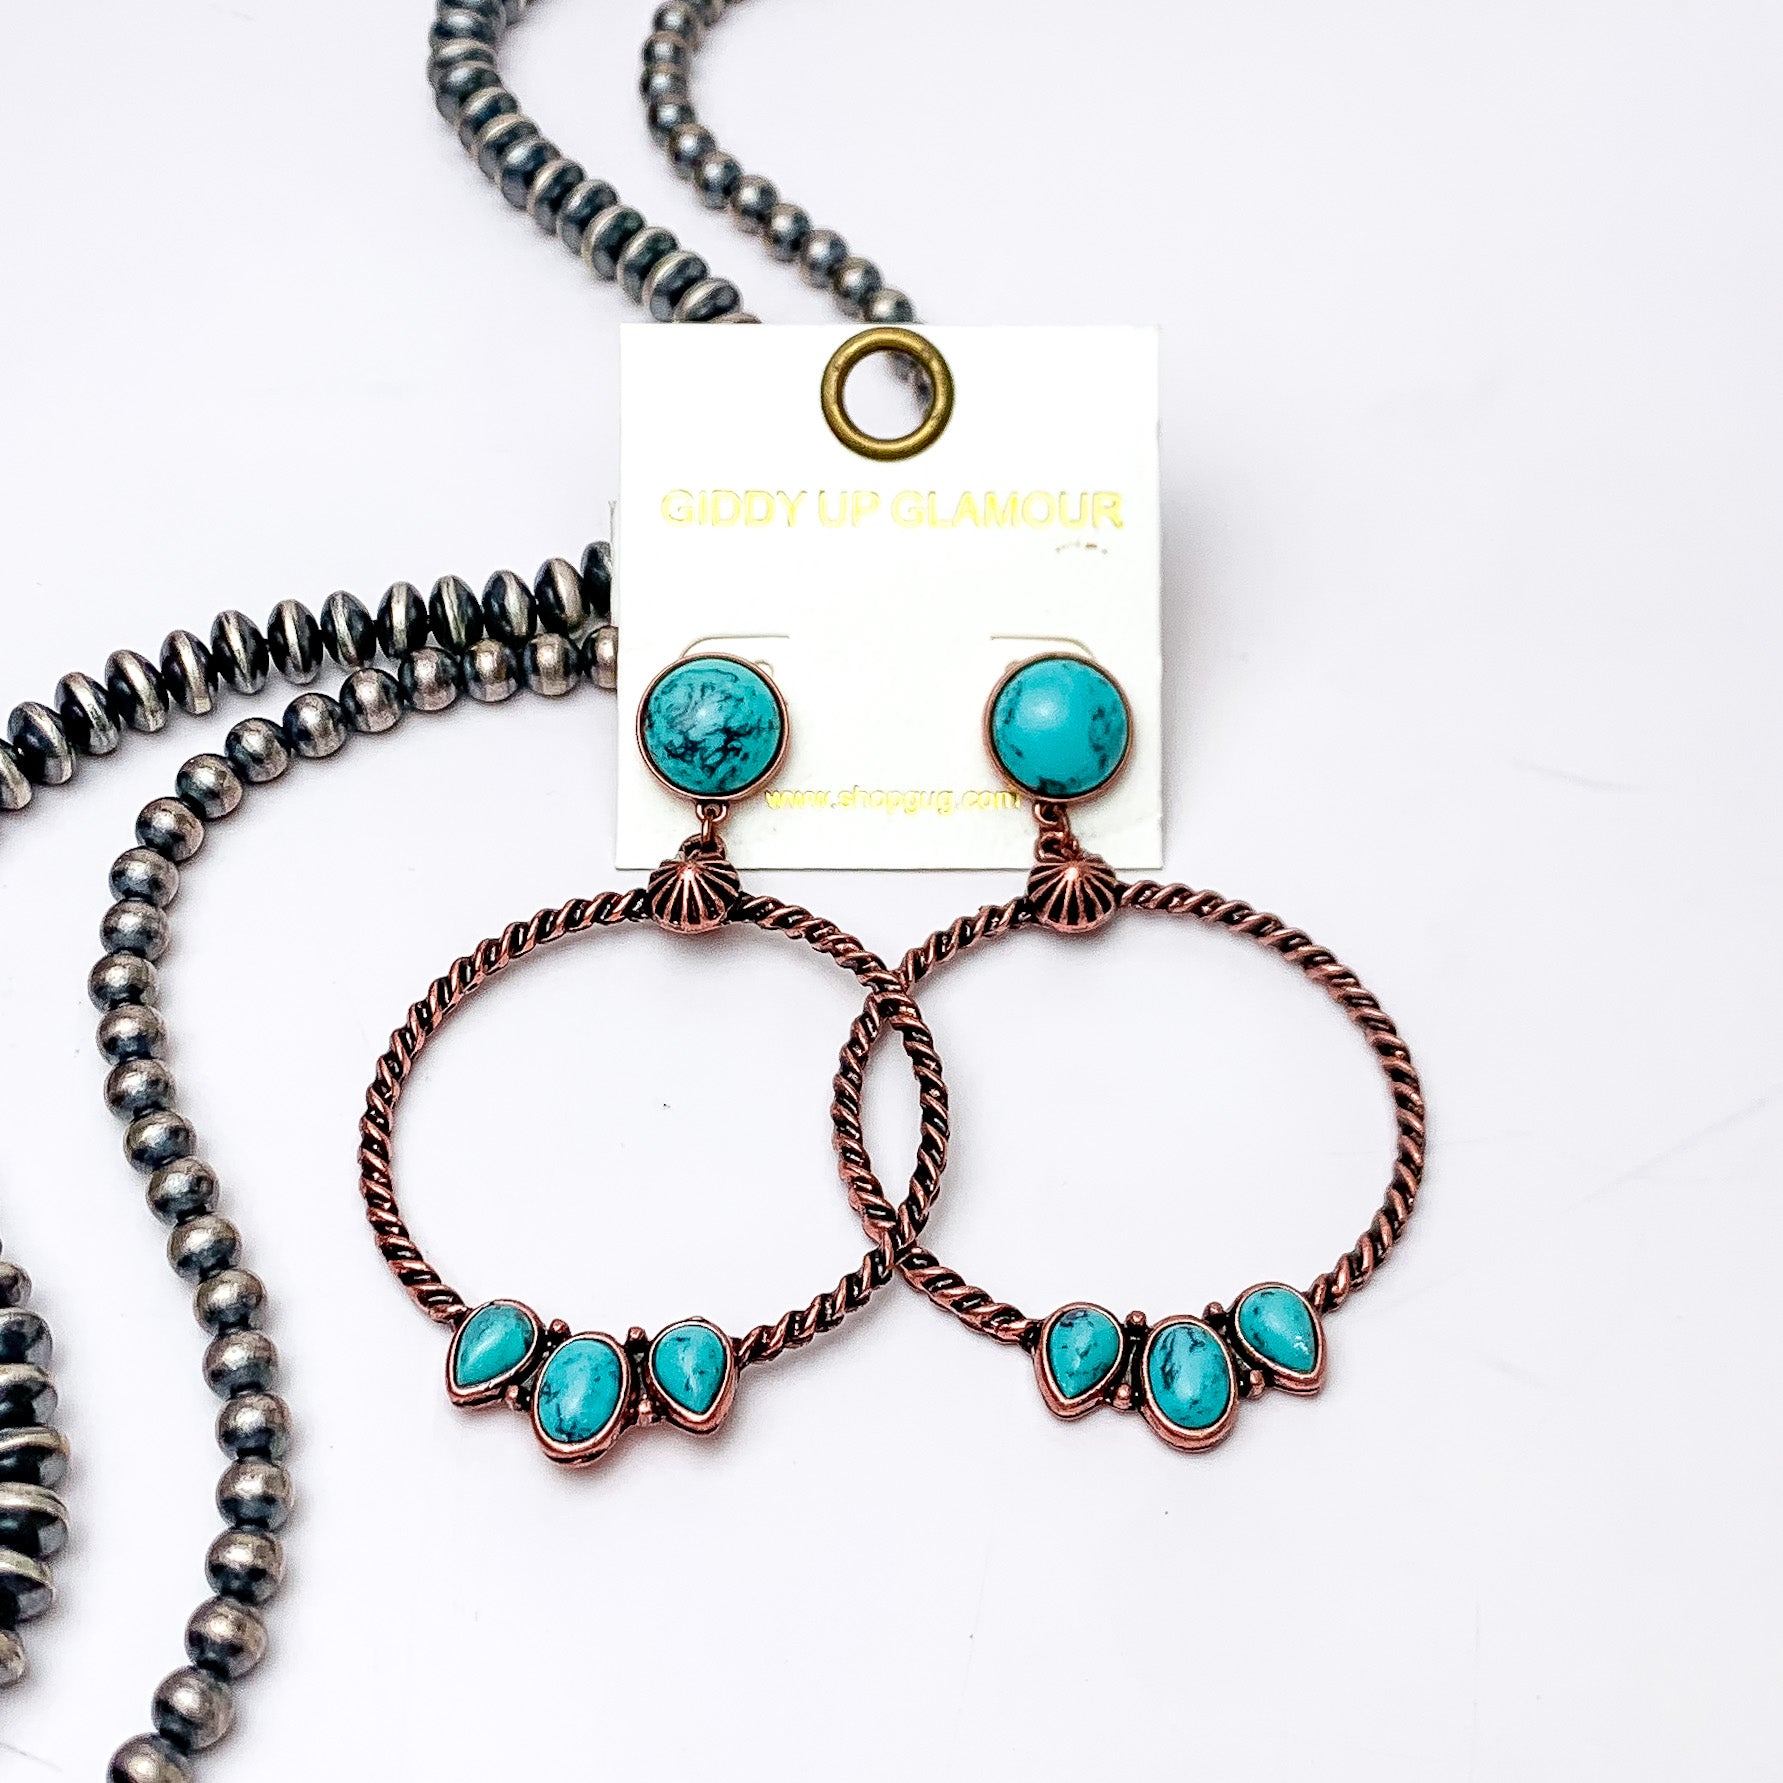 Circle, turquoise stone post earrings with a copper circle drop pendant. At the bottom of the circle there are three different shaped stones in turquoise. These earrings are pictured on a white background with silver beads on the left side bottom of the picture. 